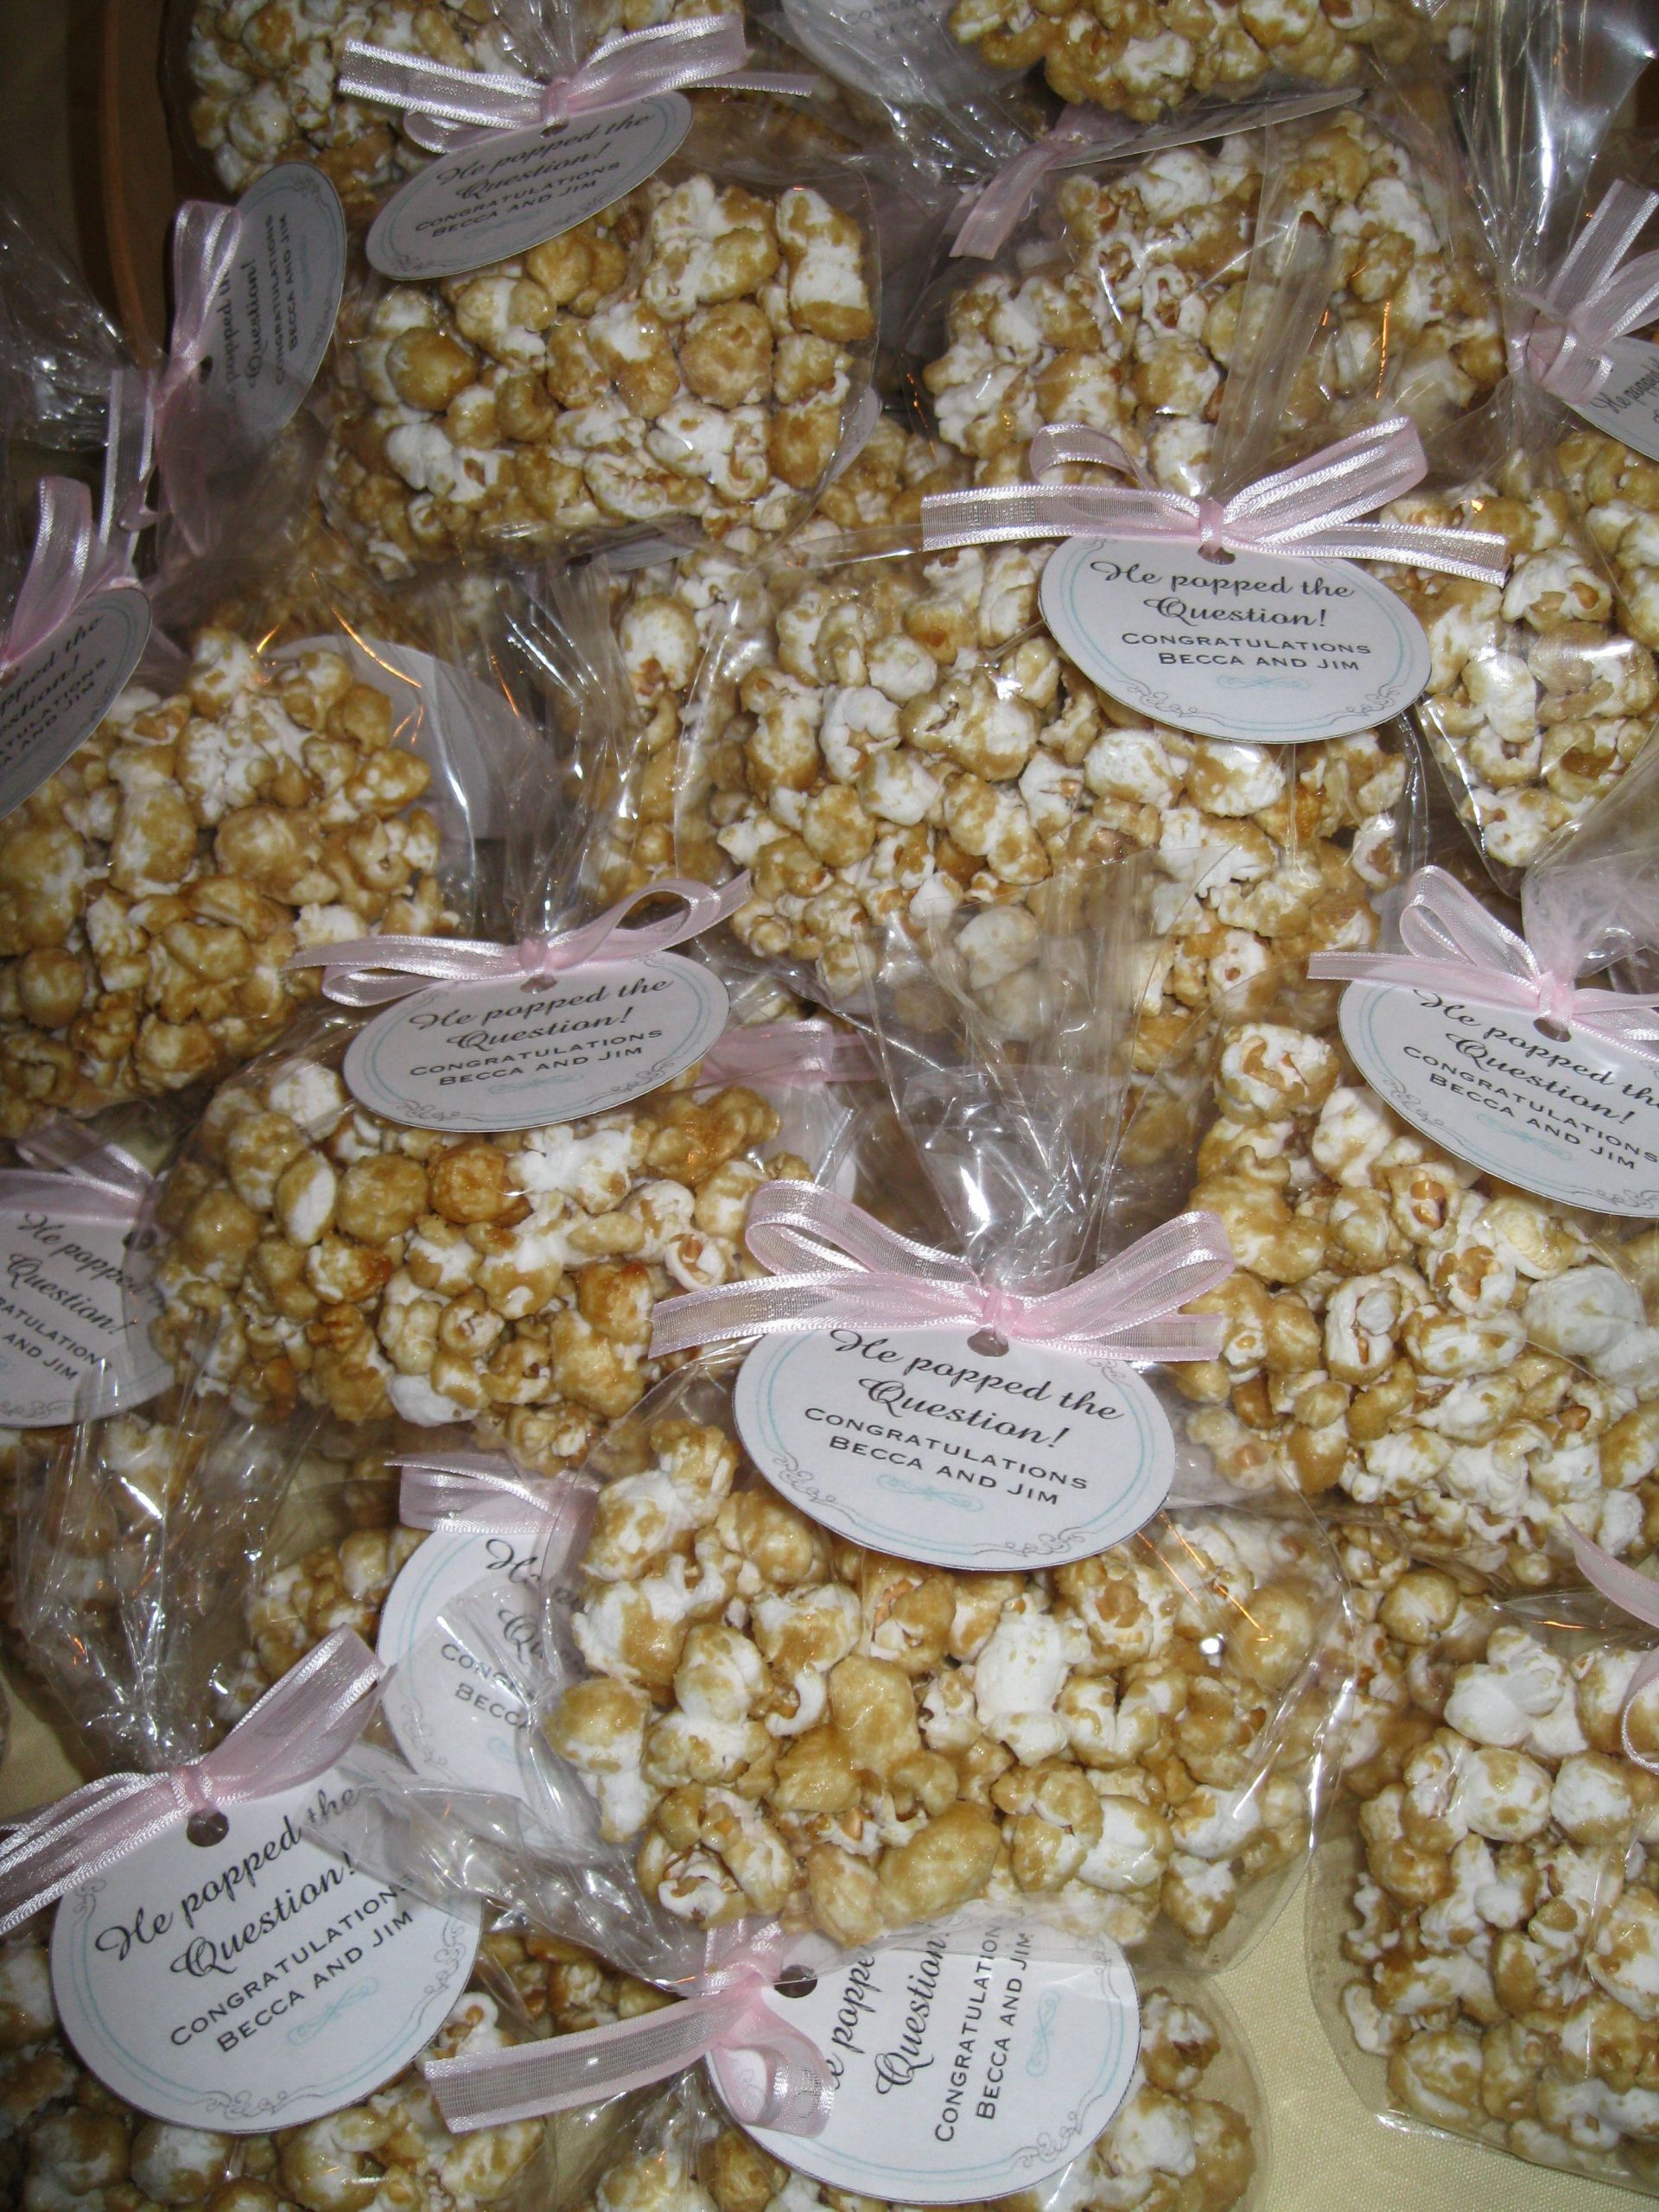 Wedding Engagement Party Theme Ideas
 Caramel popcorn favors He "popped" the question Vintage